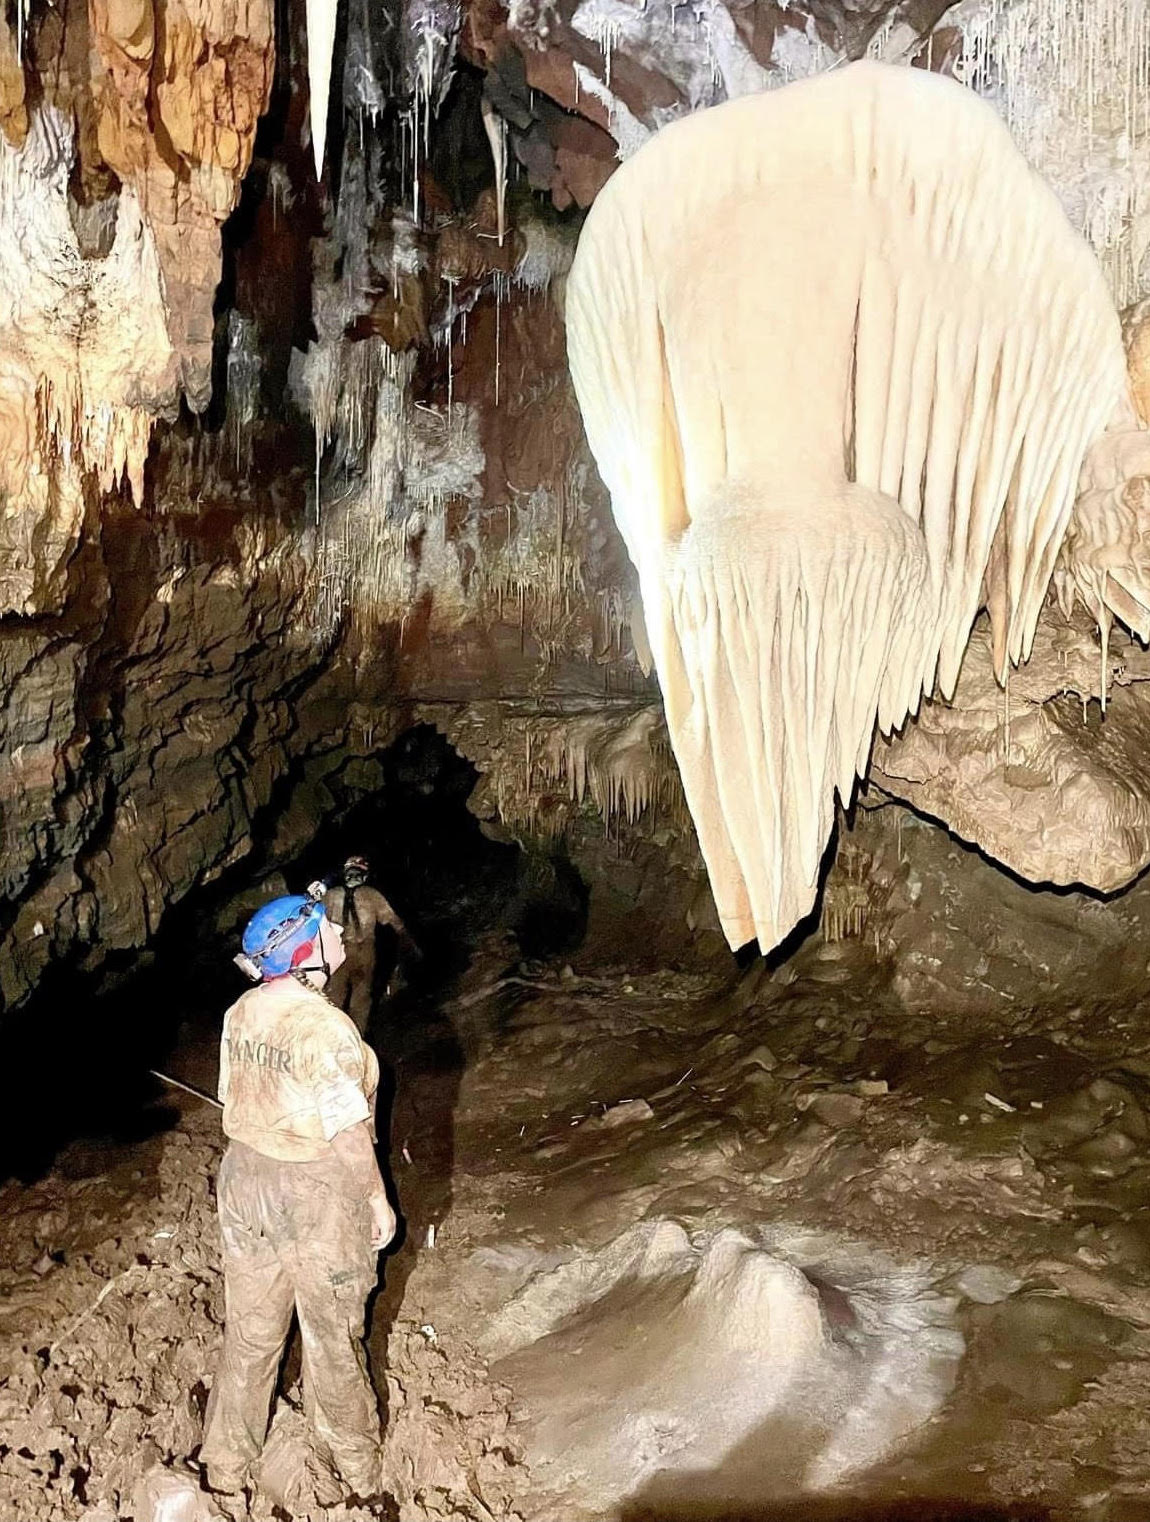 Chelsea Ballard, Cave Unit Manager at Kartchner Caverns, stands next to a large bright white flowstone formation that resembles an angel wing.